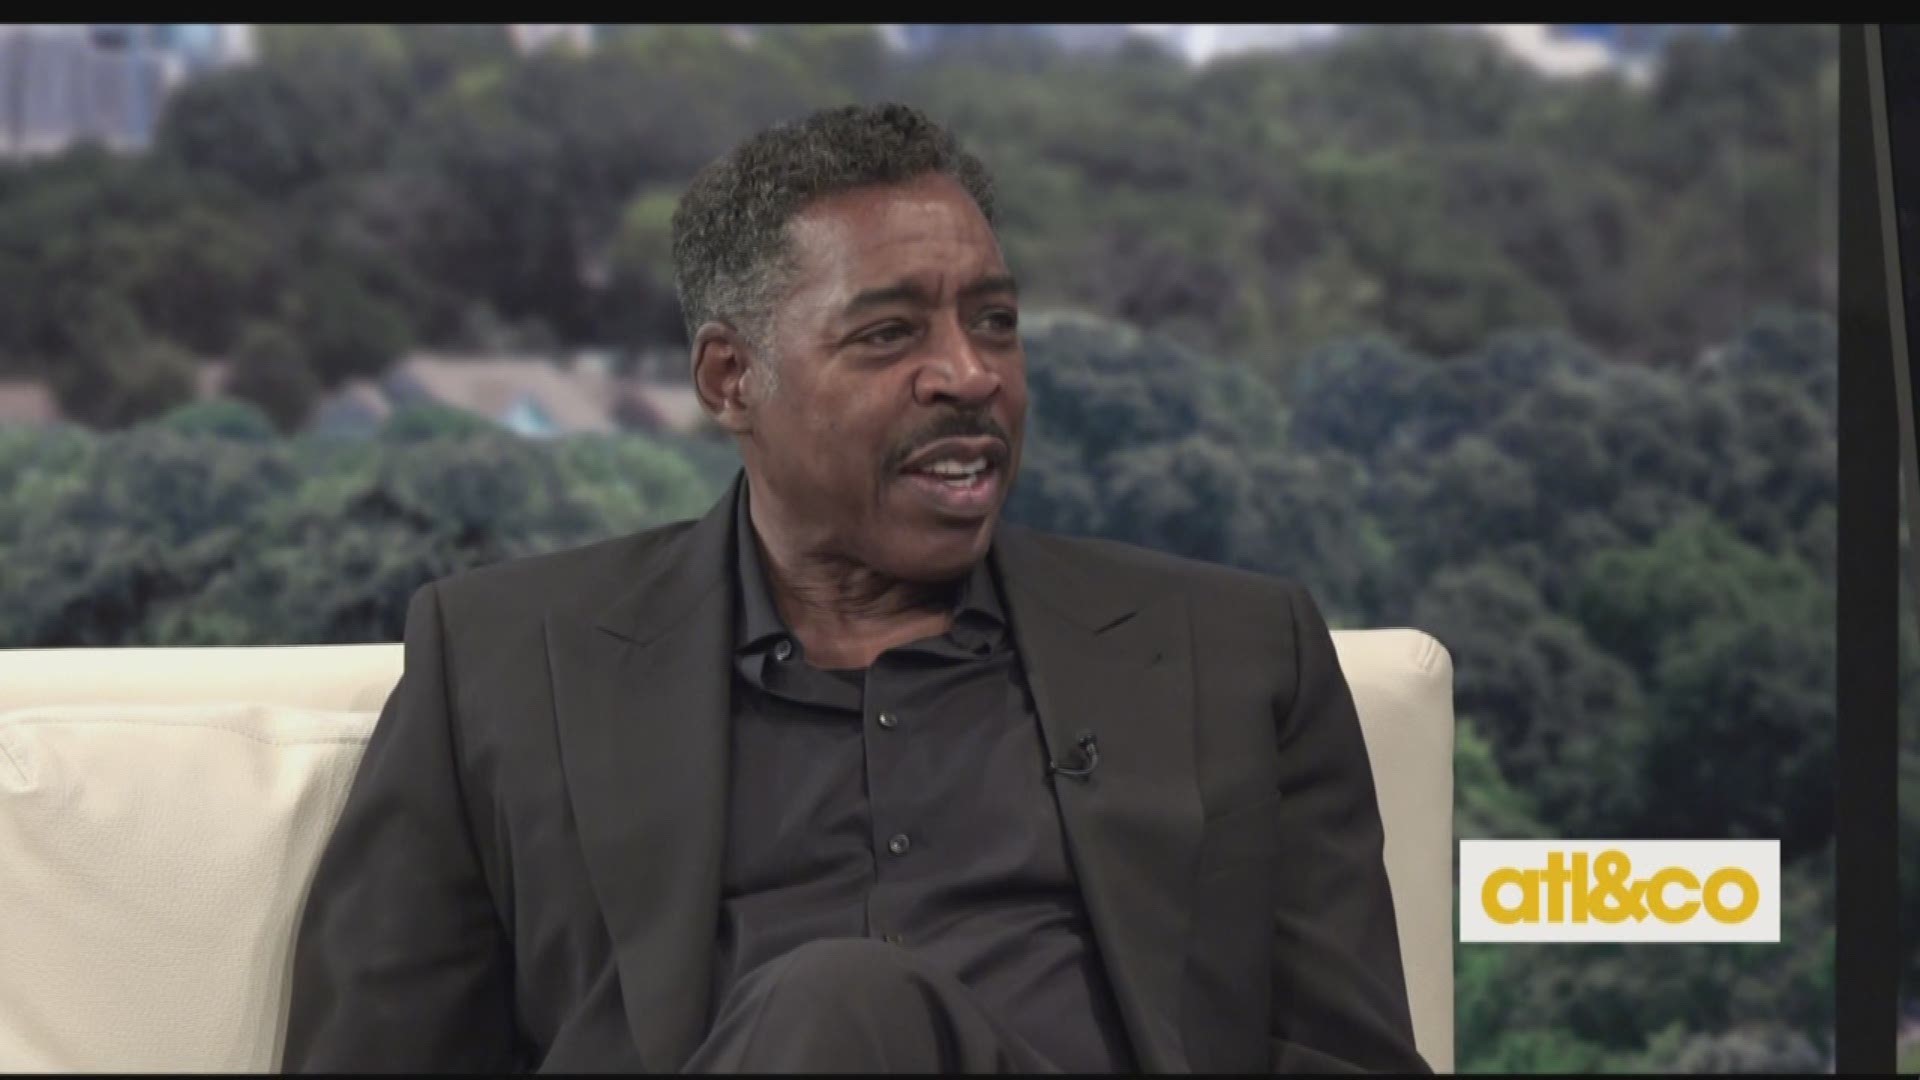 Iconic character actor Ernie Hudson talks about his long-running career and new BET show 'Carl Weber's The Family Business' on 'Atlanta & Company'